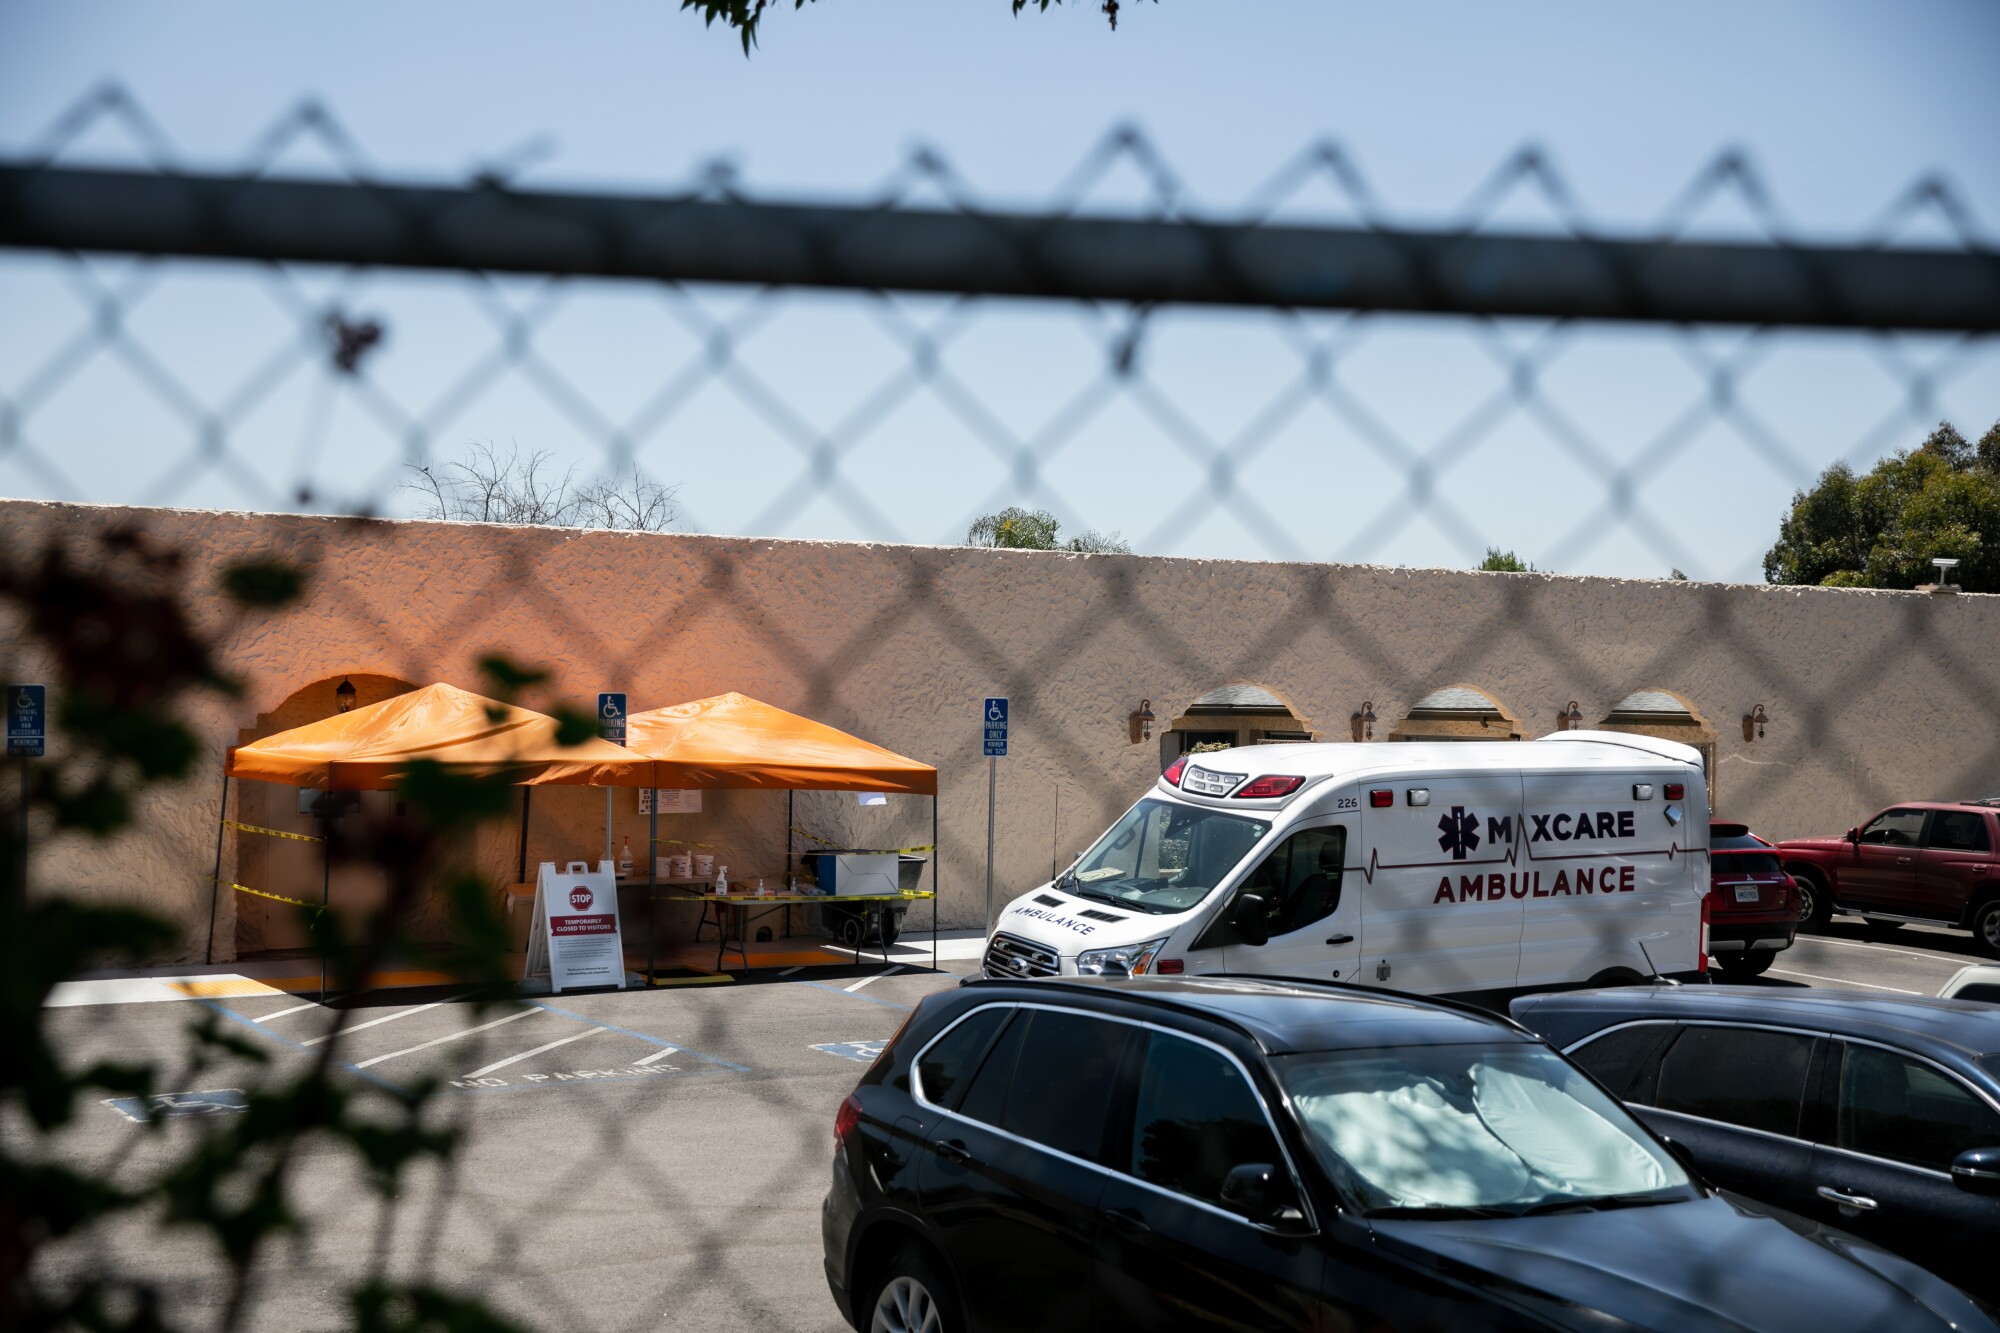 An ambulance is parked outside the Reo Vista Healthcare Center on  July 9, 2020. (Sam Hodgson / The San Diego Union-Tribune)